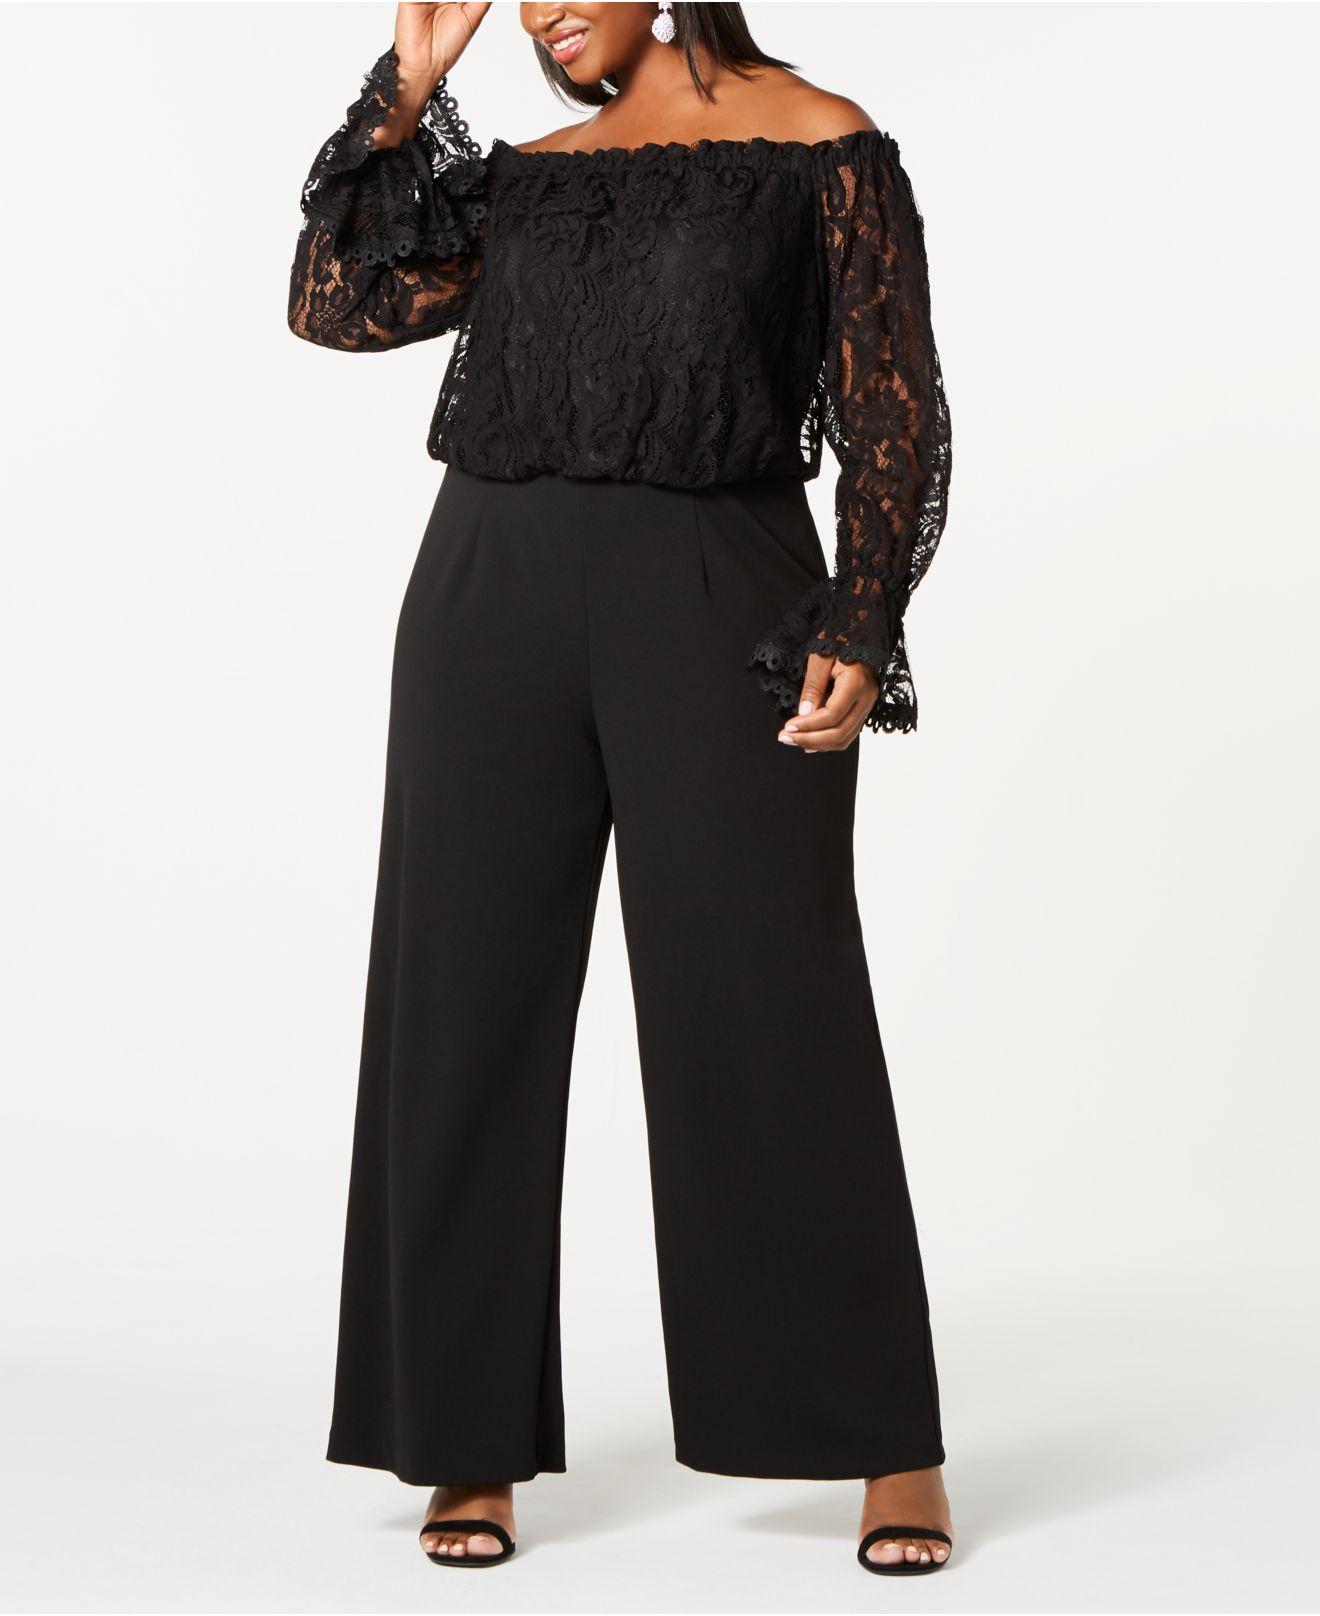 Adrianna Papell Plus Size Off-the-shoulder Lace Jumpsuit in Black - Lyst